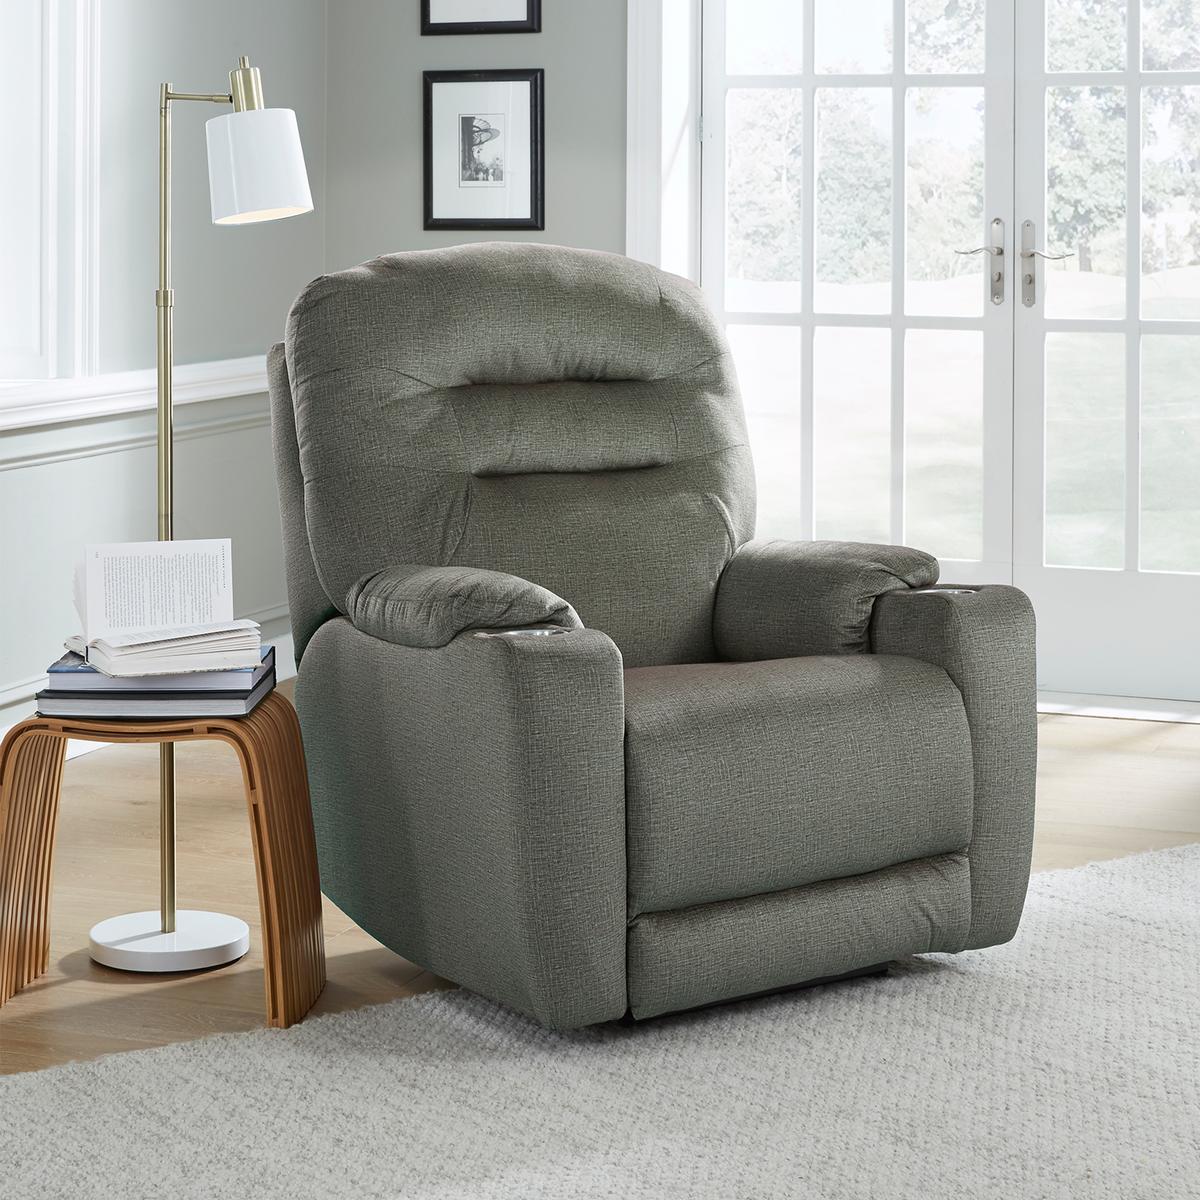 Southern Motion Front Row Rocker Recliner